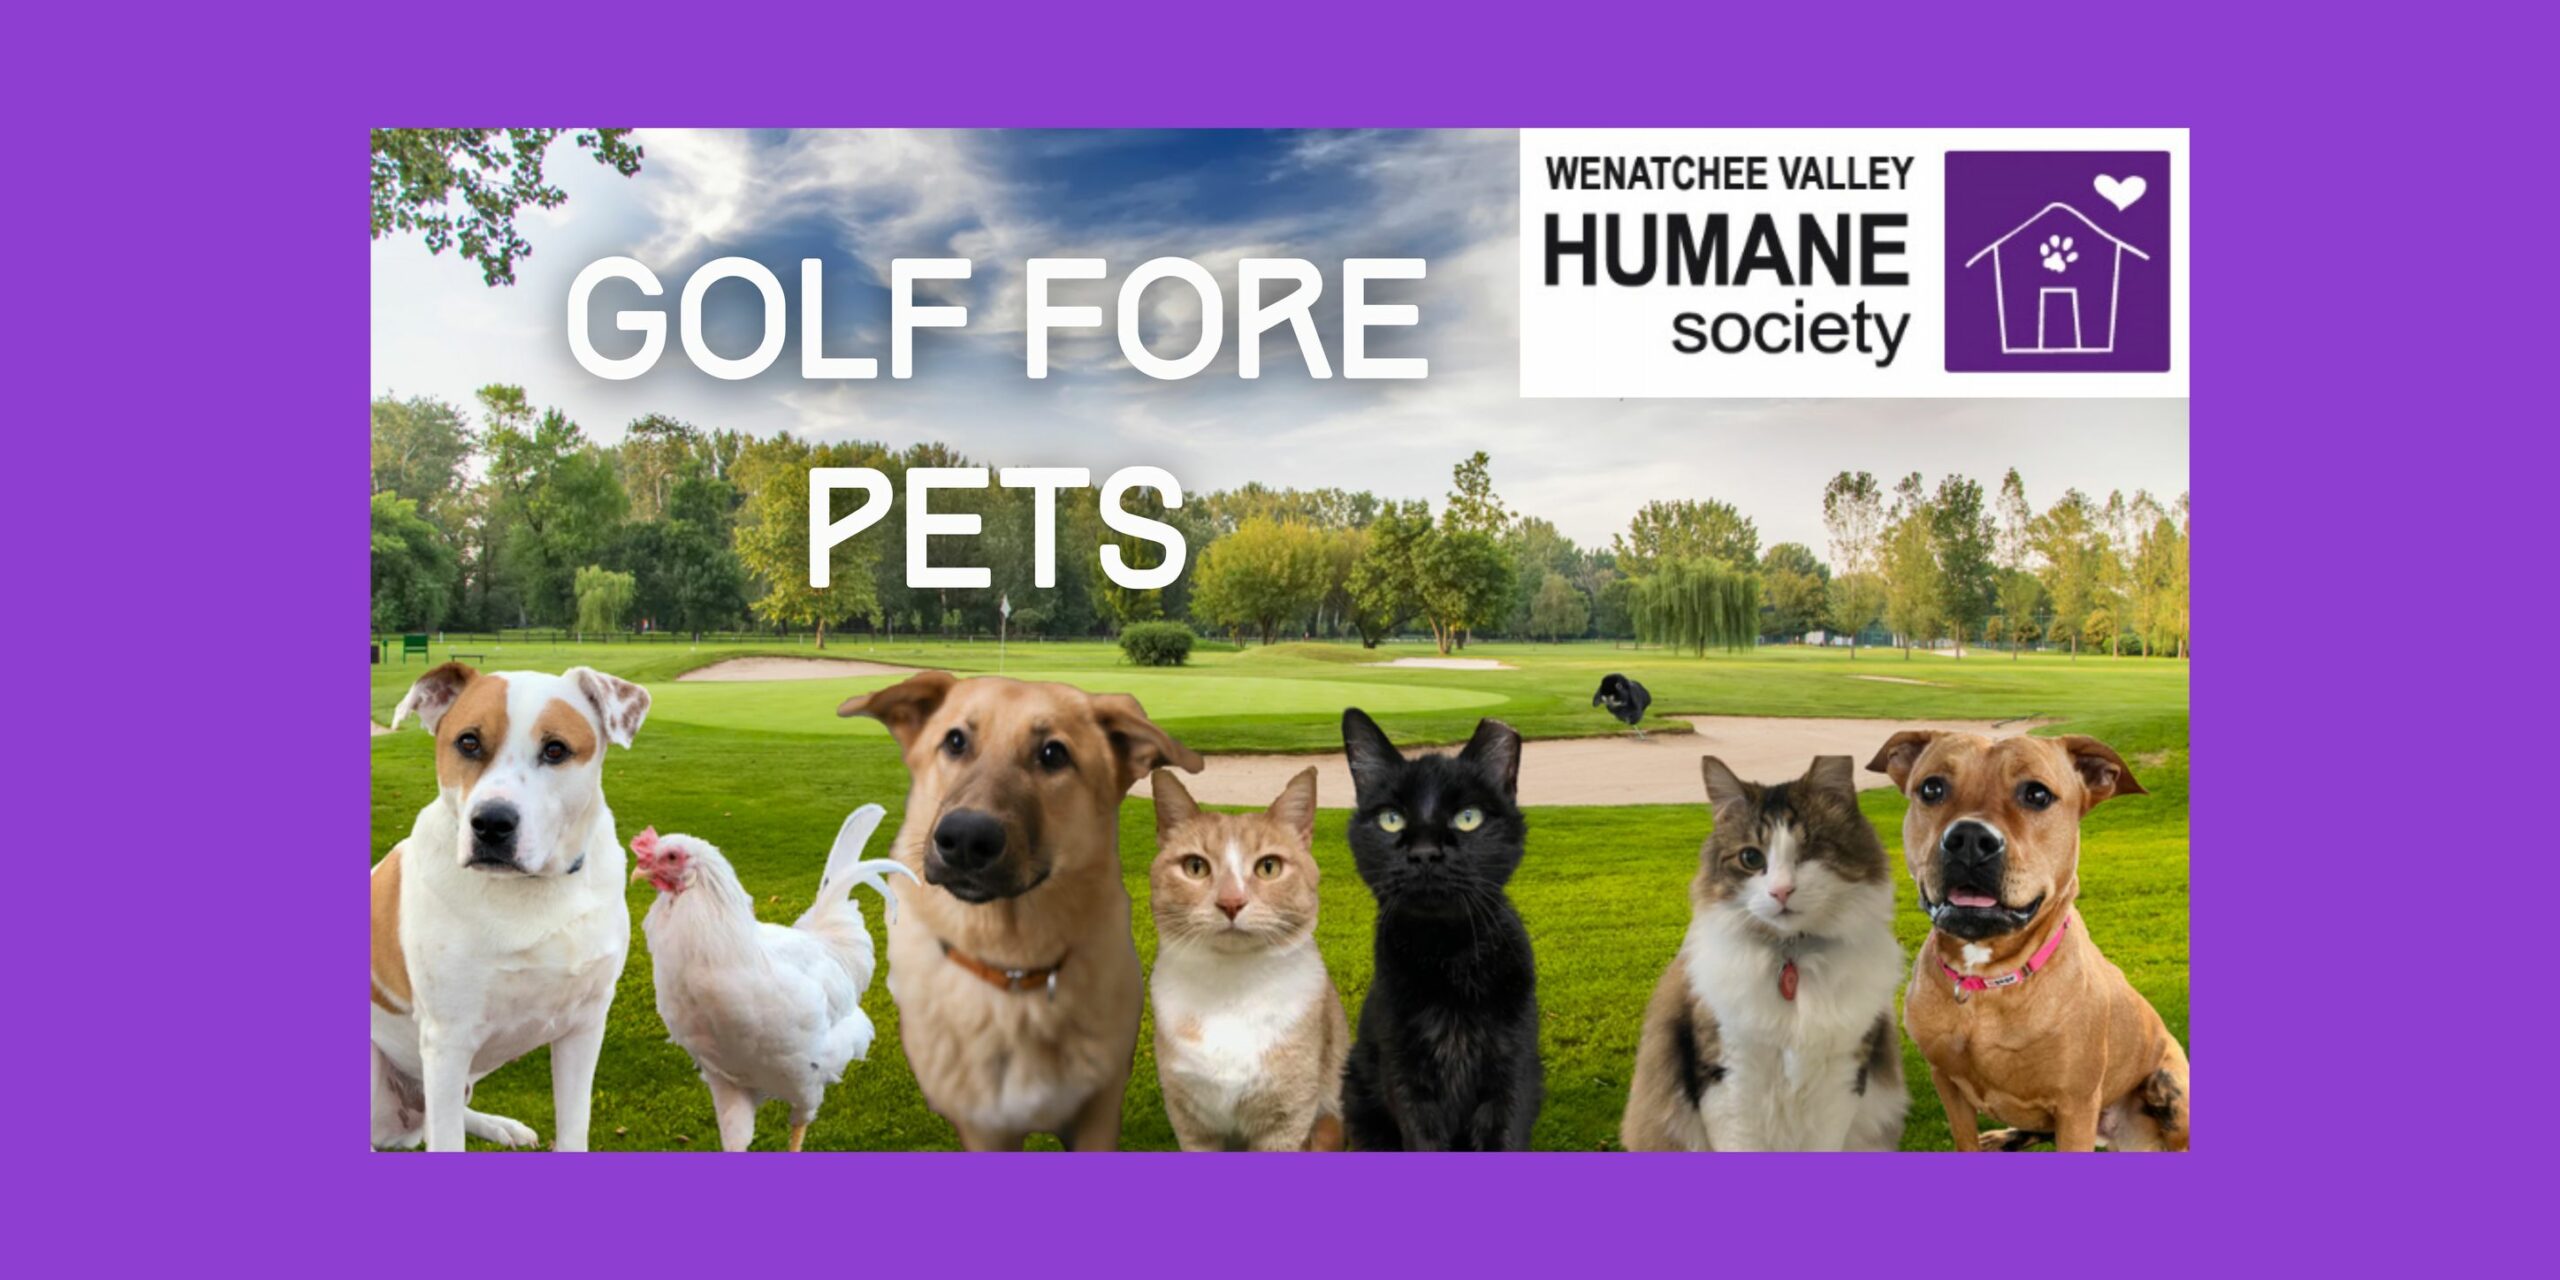 <h1 class="tribe-events-single-event-title">Golf Fore Pets</h1>